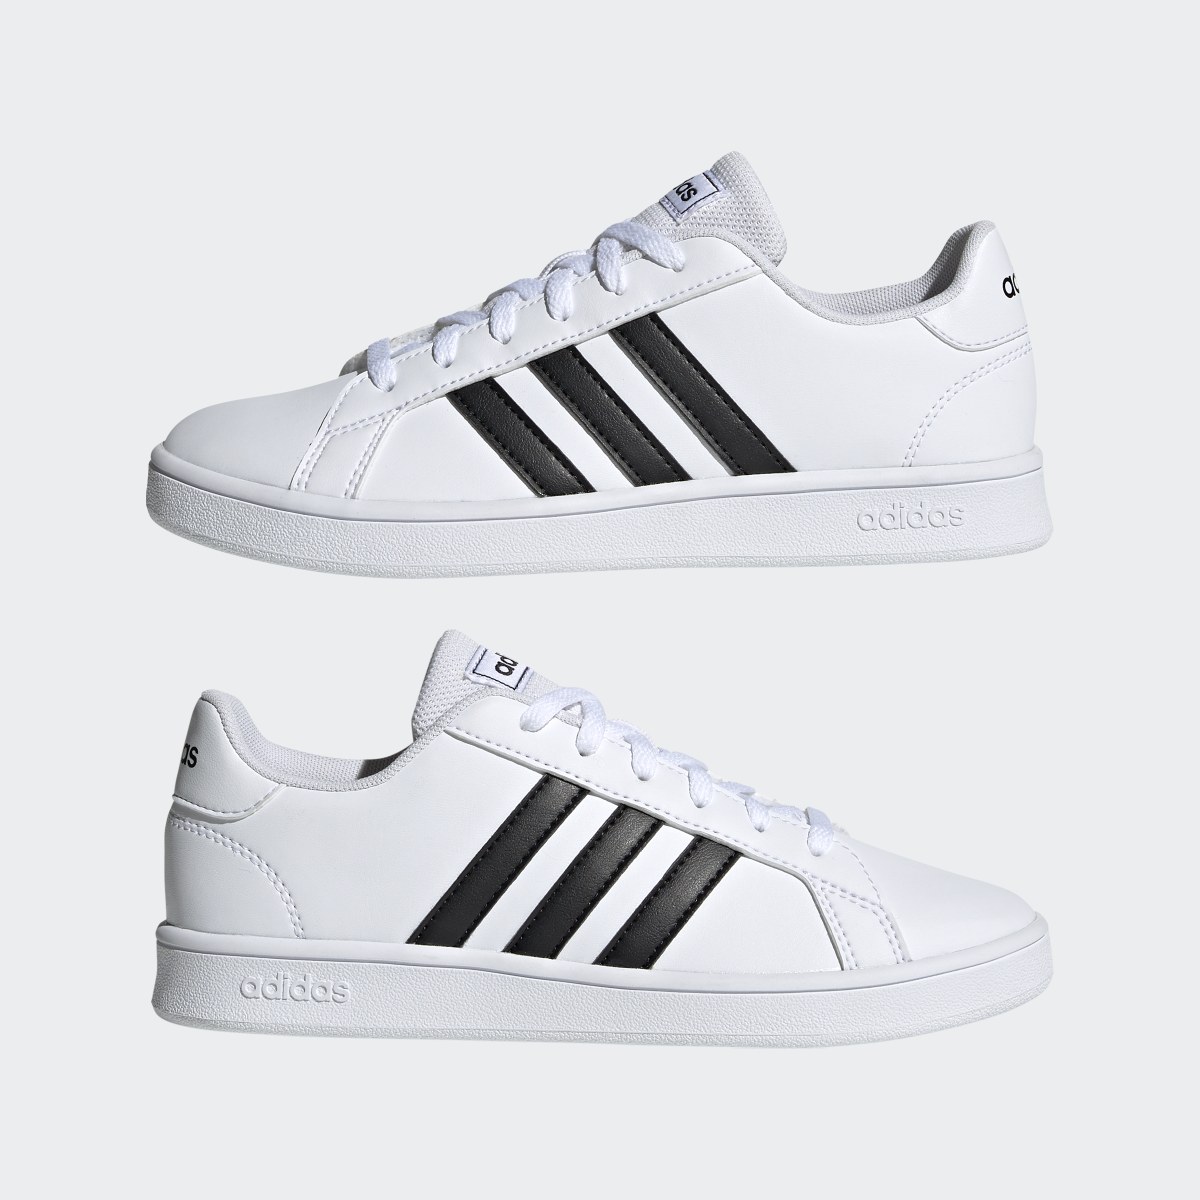 Adidas Grand Court Shoes. 9